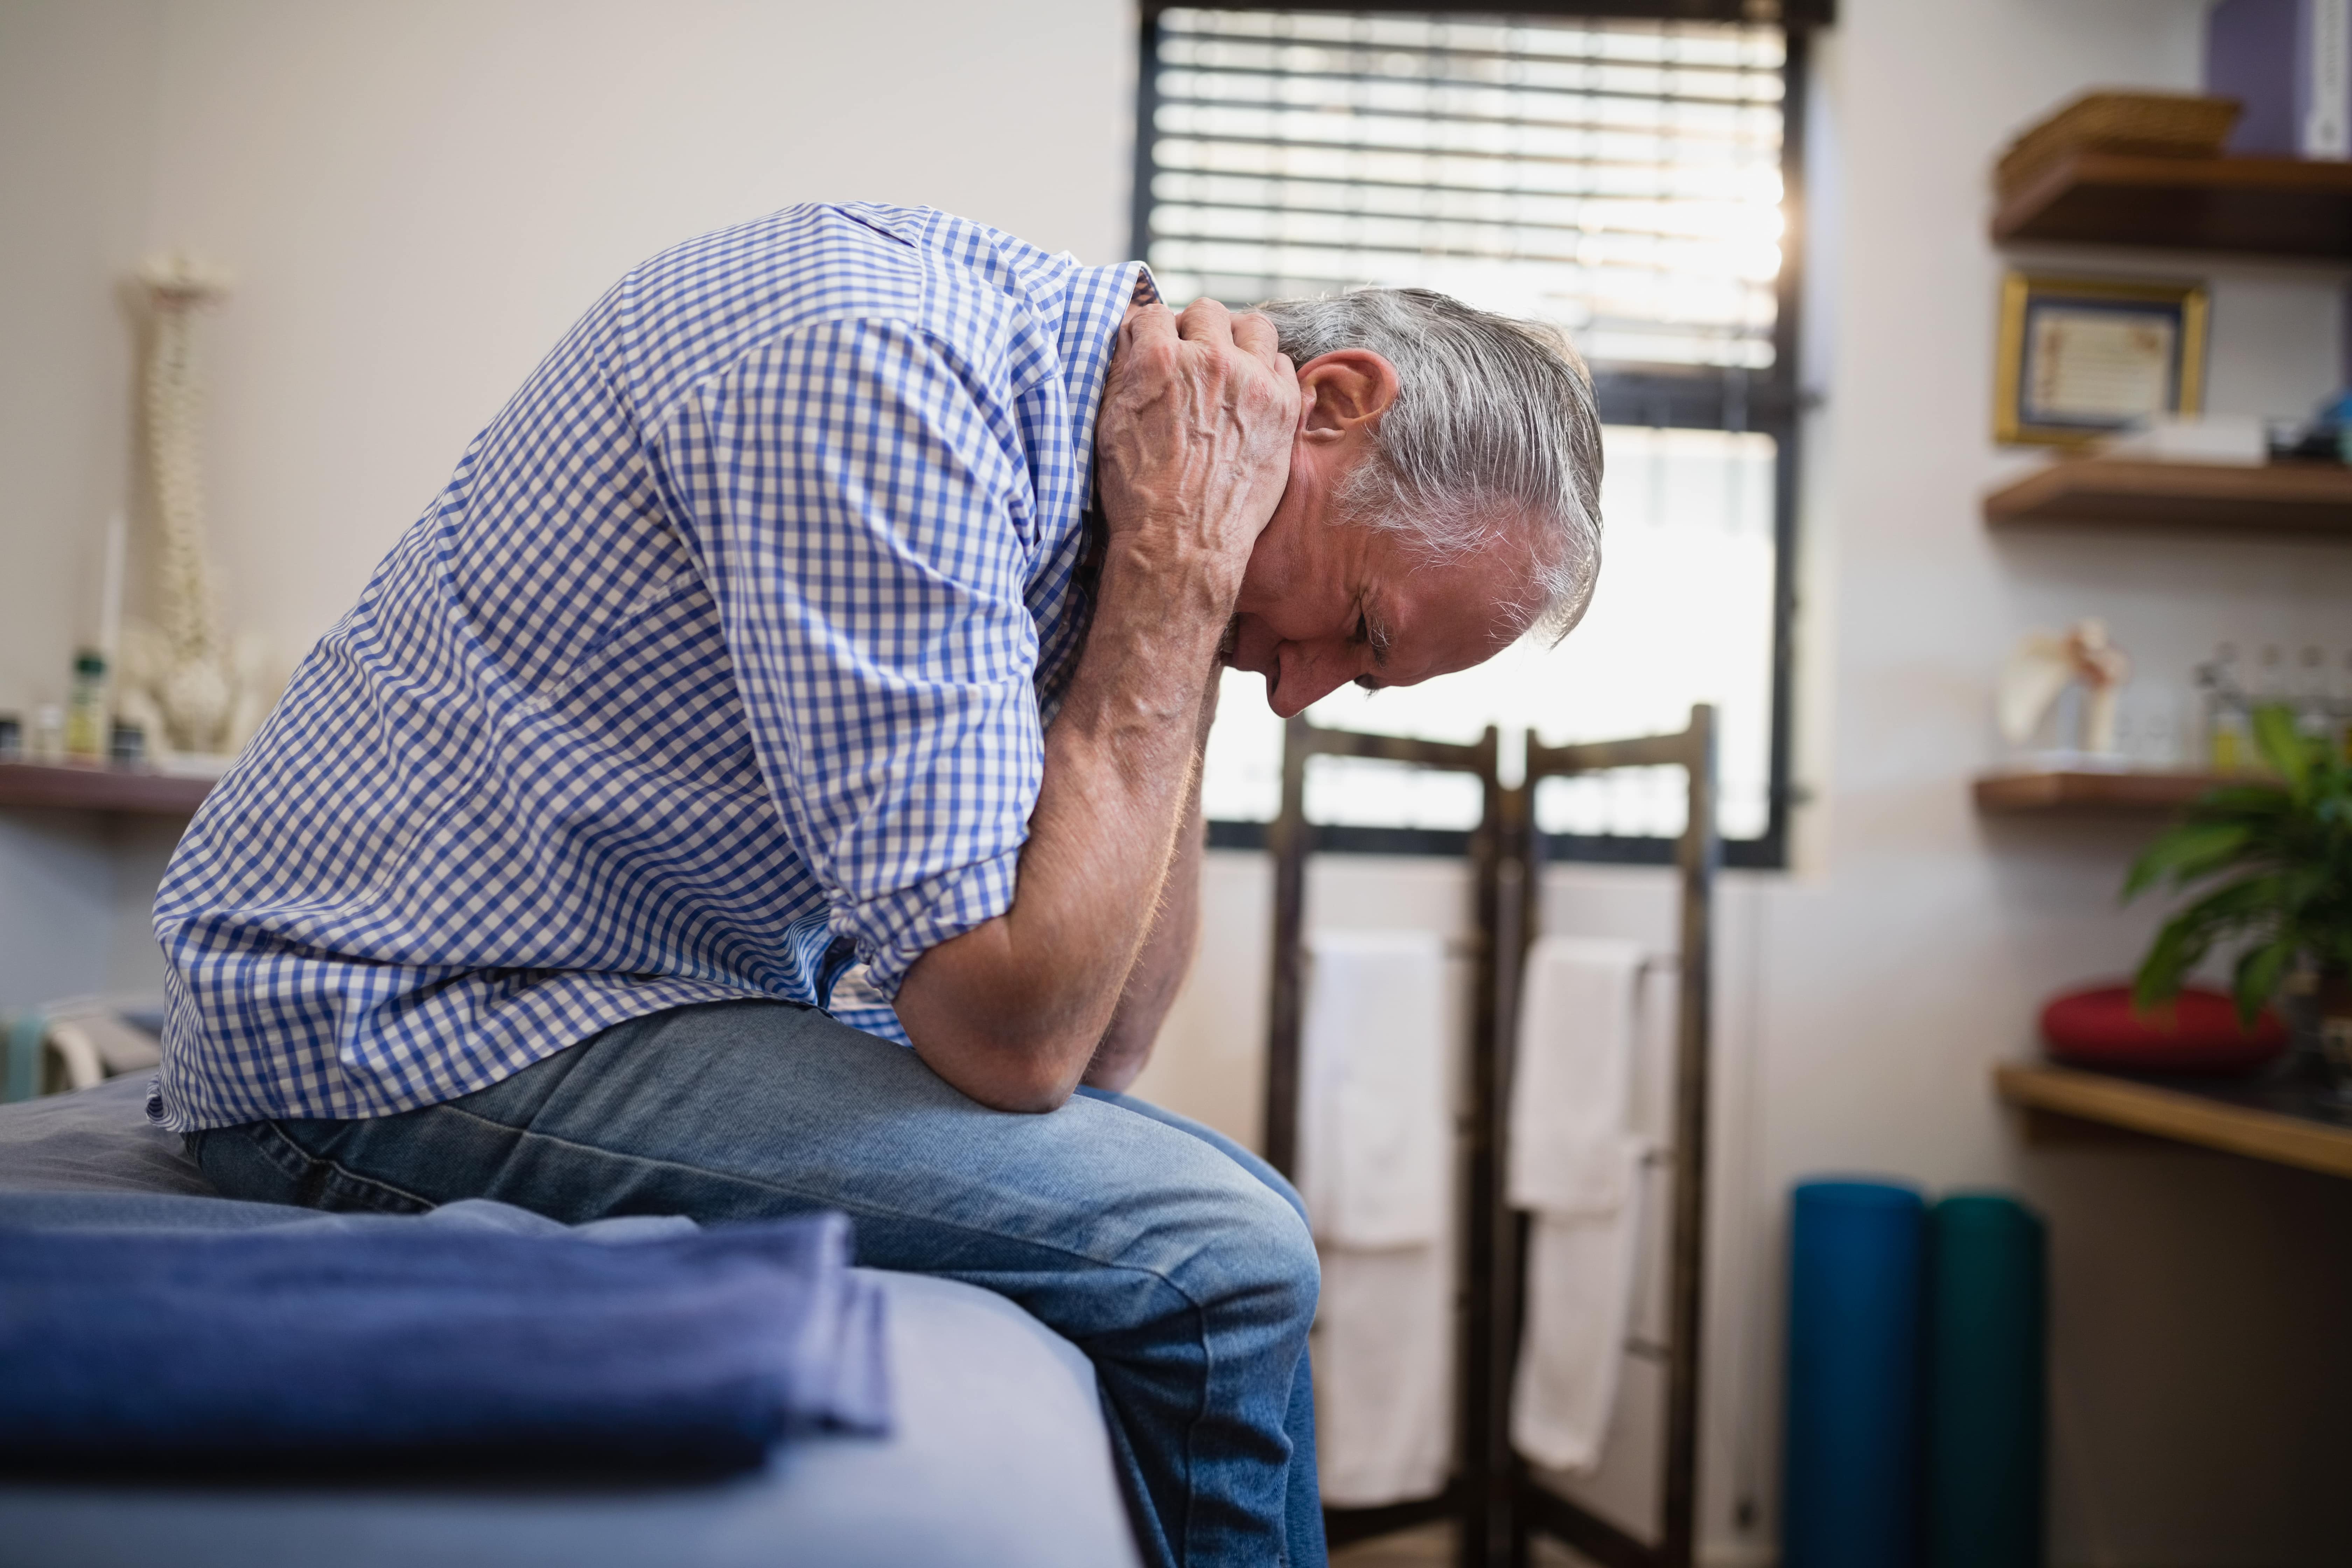 Man sitting on treatment table clutching neck in pain. He is wearing a checked blue shirt. Holding his cervical spine.